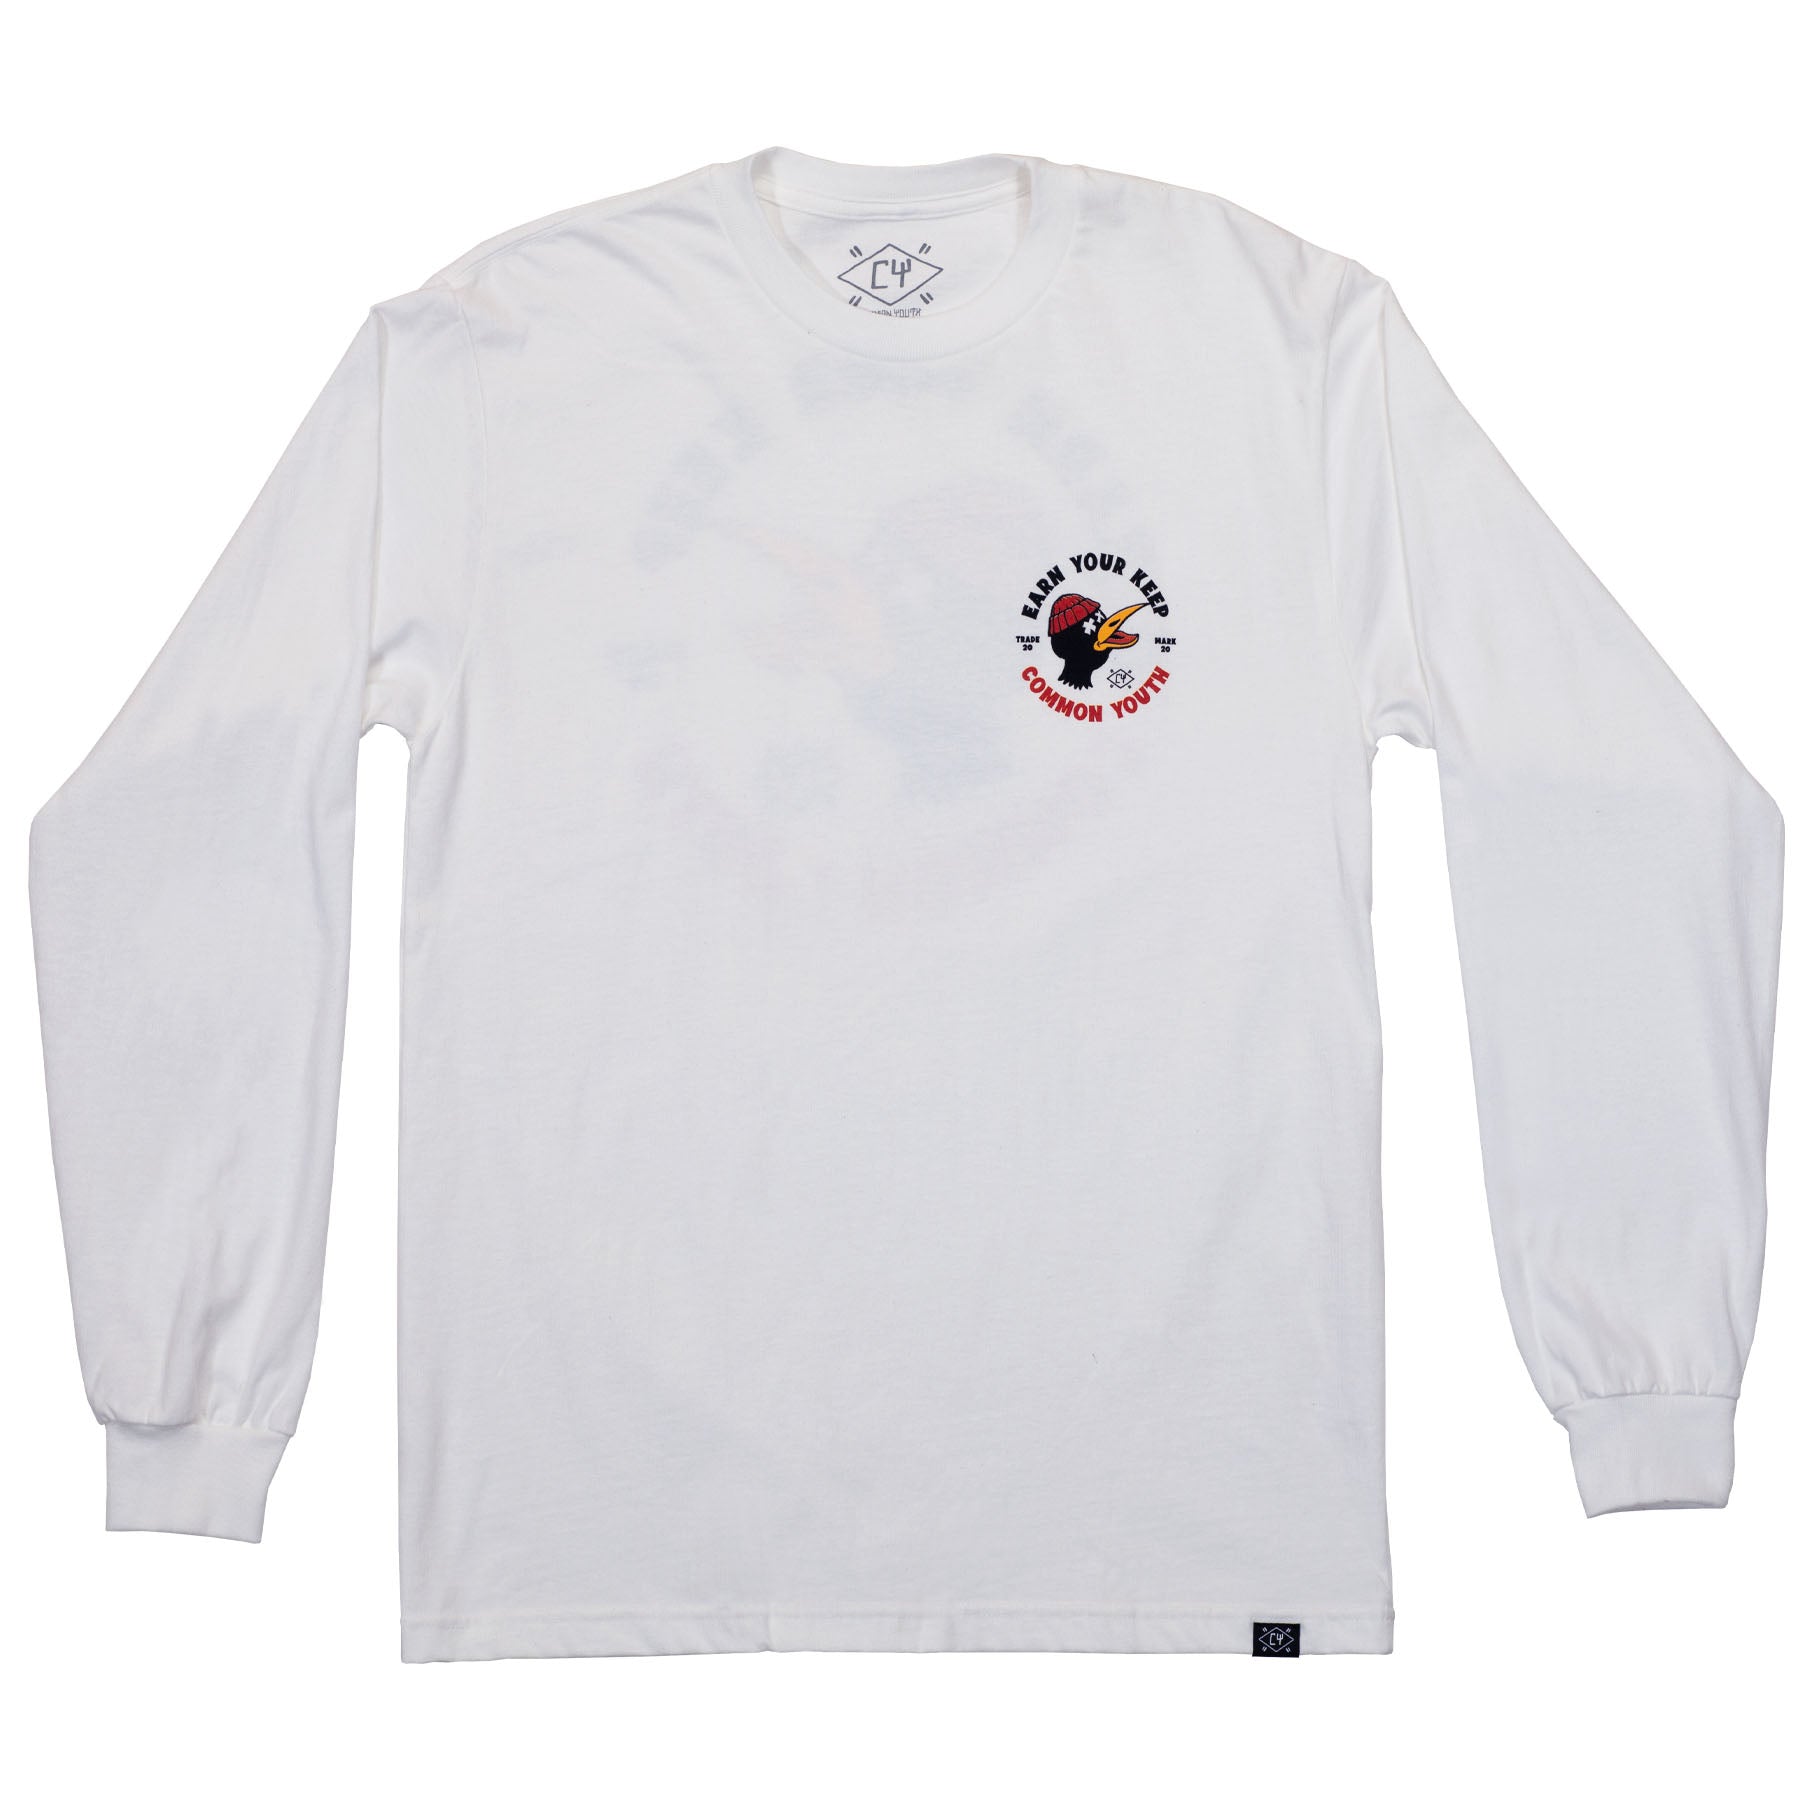 EARNED LS - commonyouthbrand